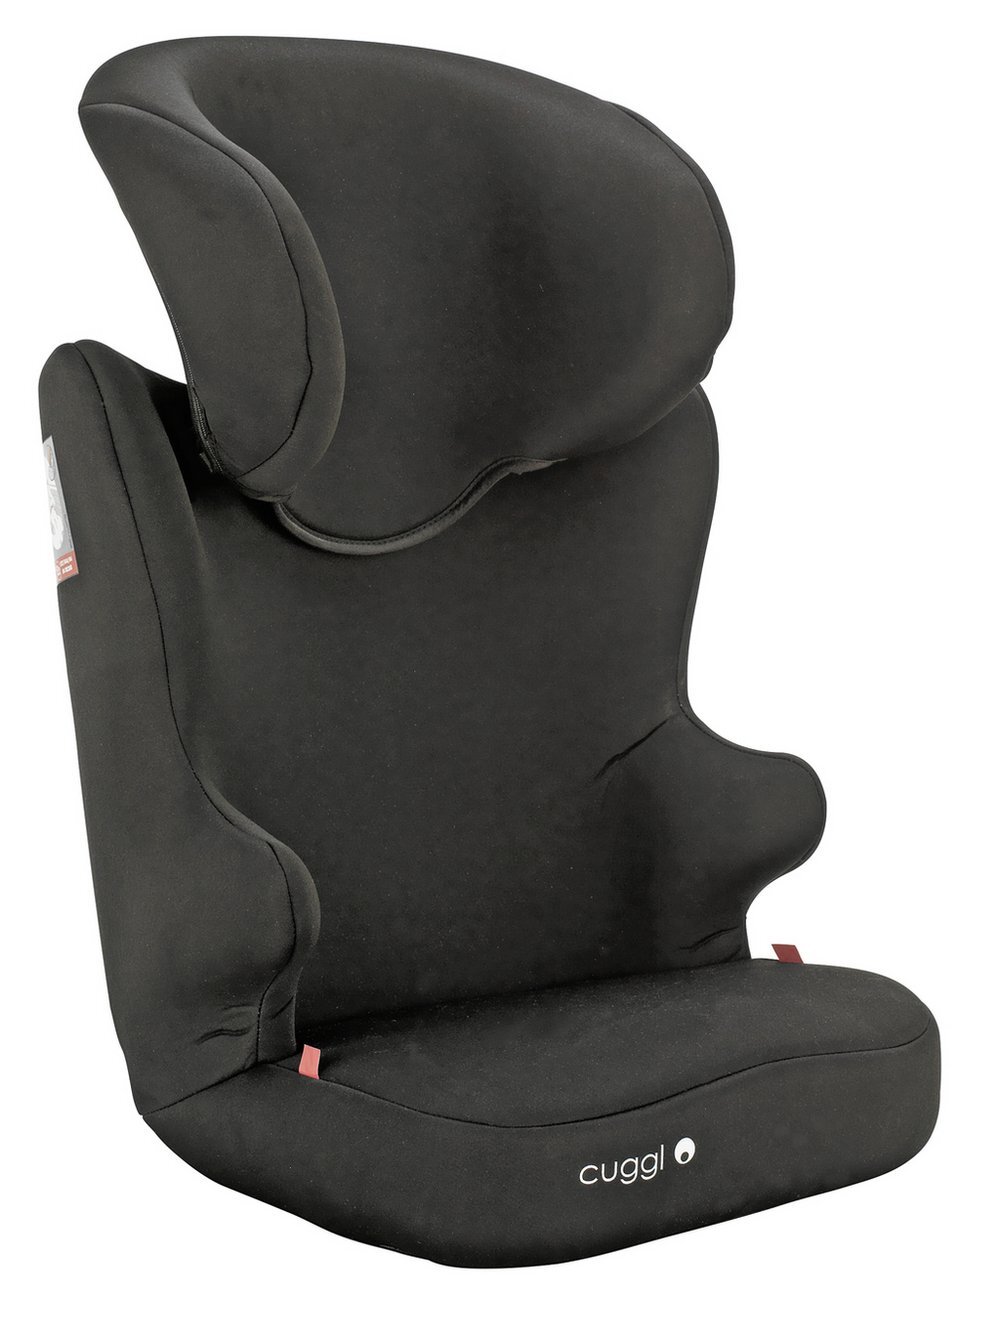 NEW CUGGL SWALLOW GROUP 2/3 BABY CAR SEAT £26.99 Inc Vat & Del